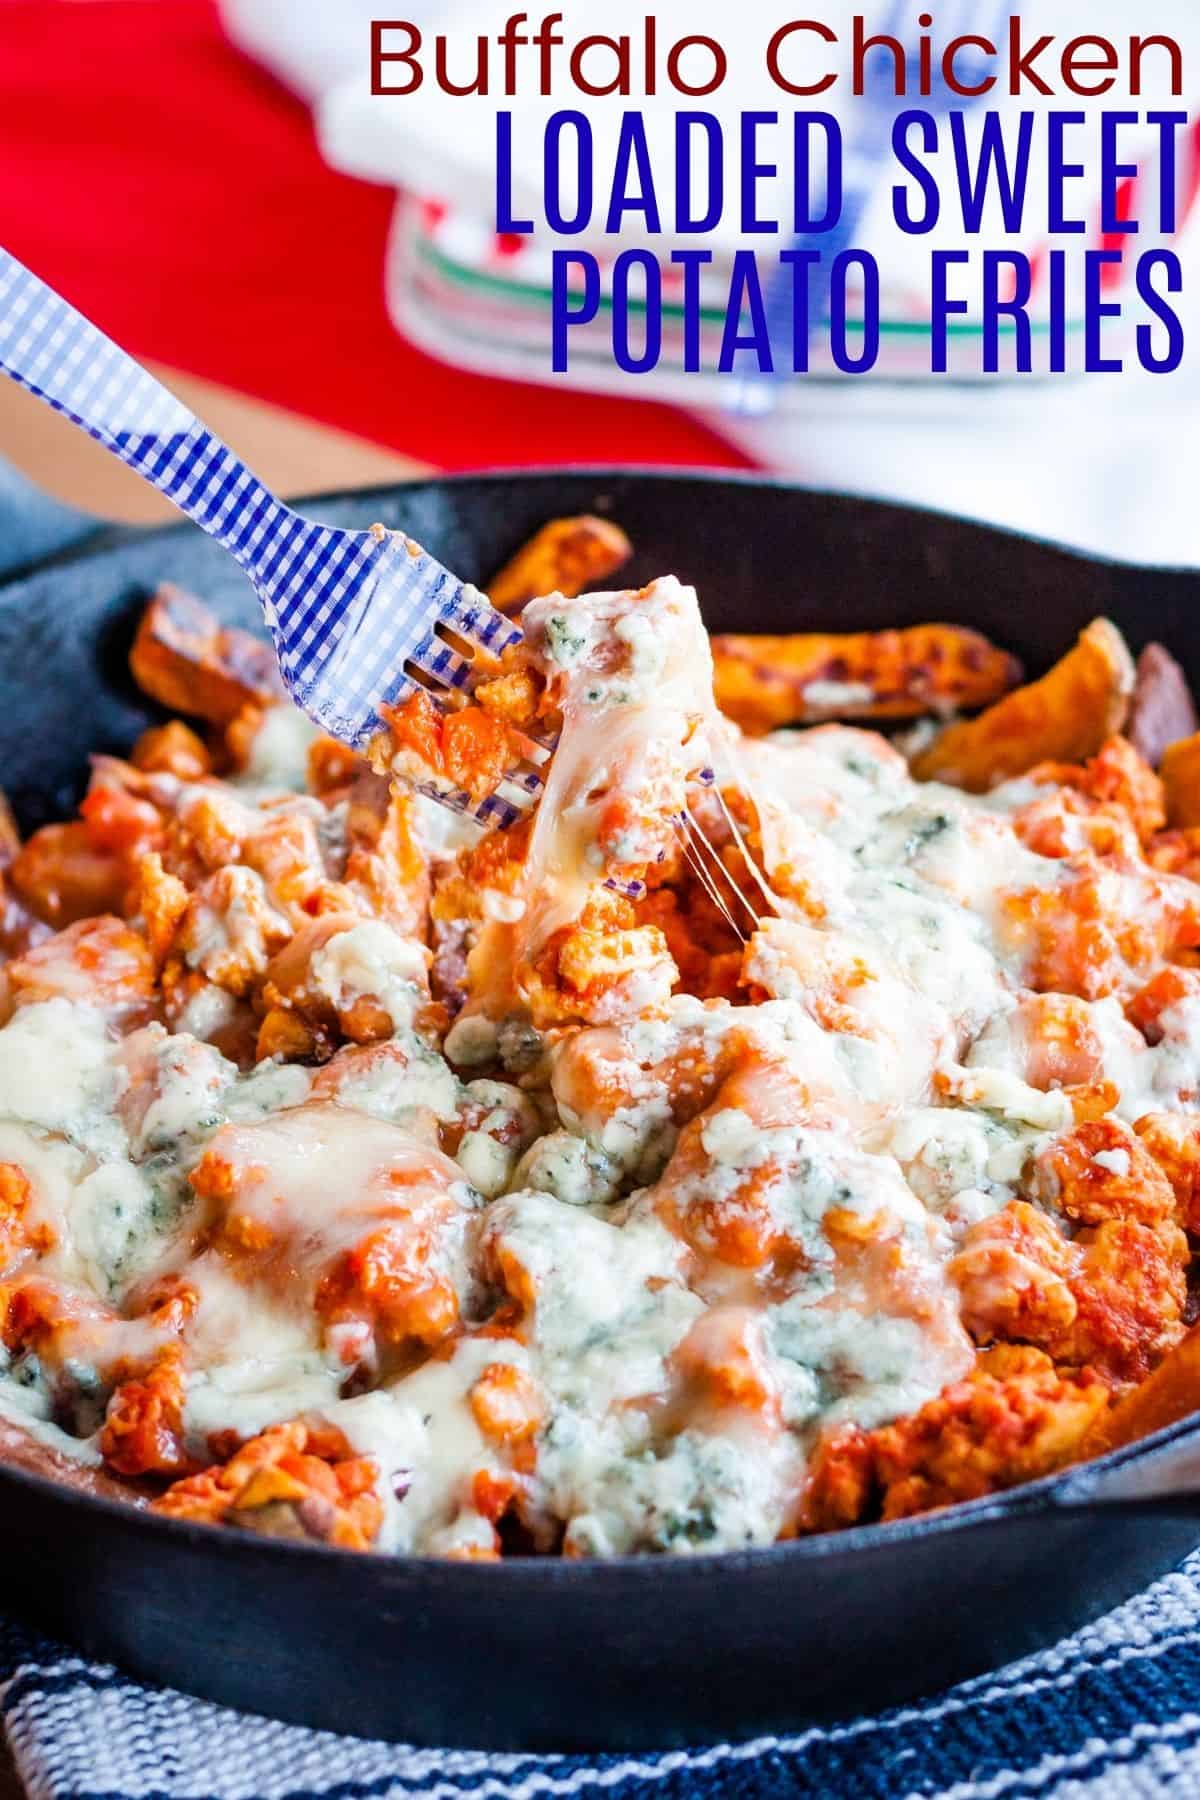 Buffalo Chicken Loaded Baked Sweet Potato Fries - a tasty twist on poutine with plenty of spicy hot wing flavor and lots of cheese